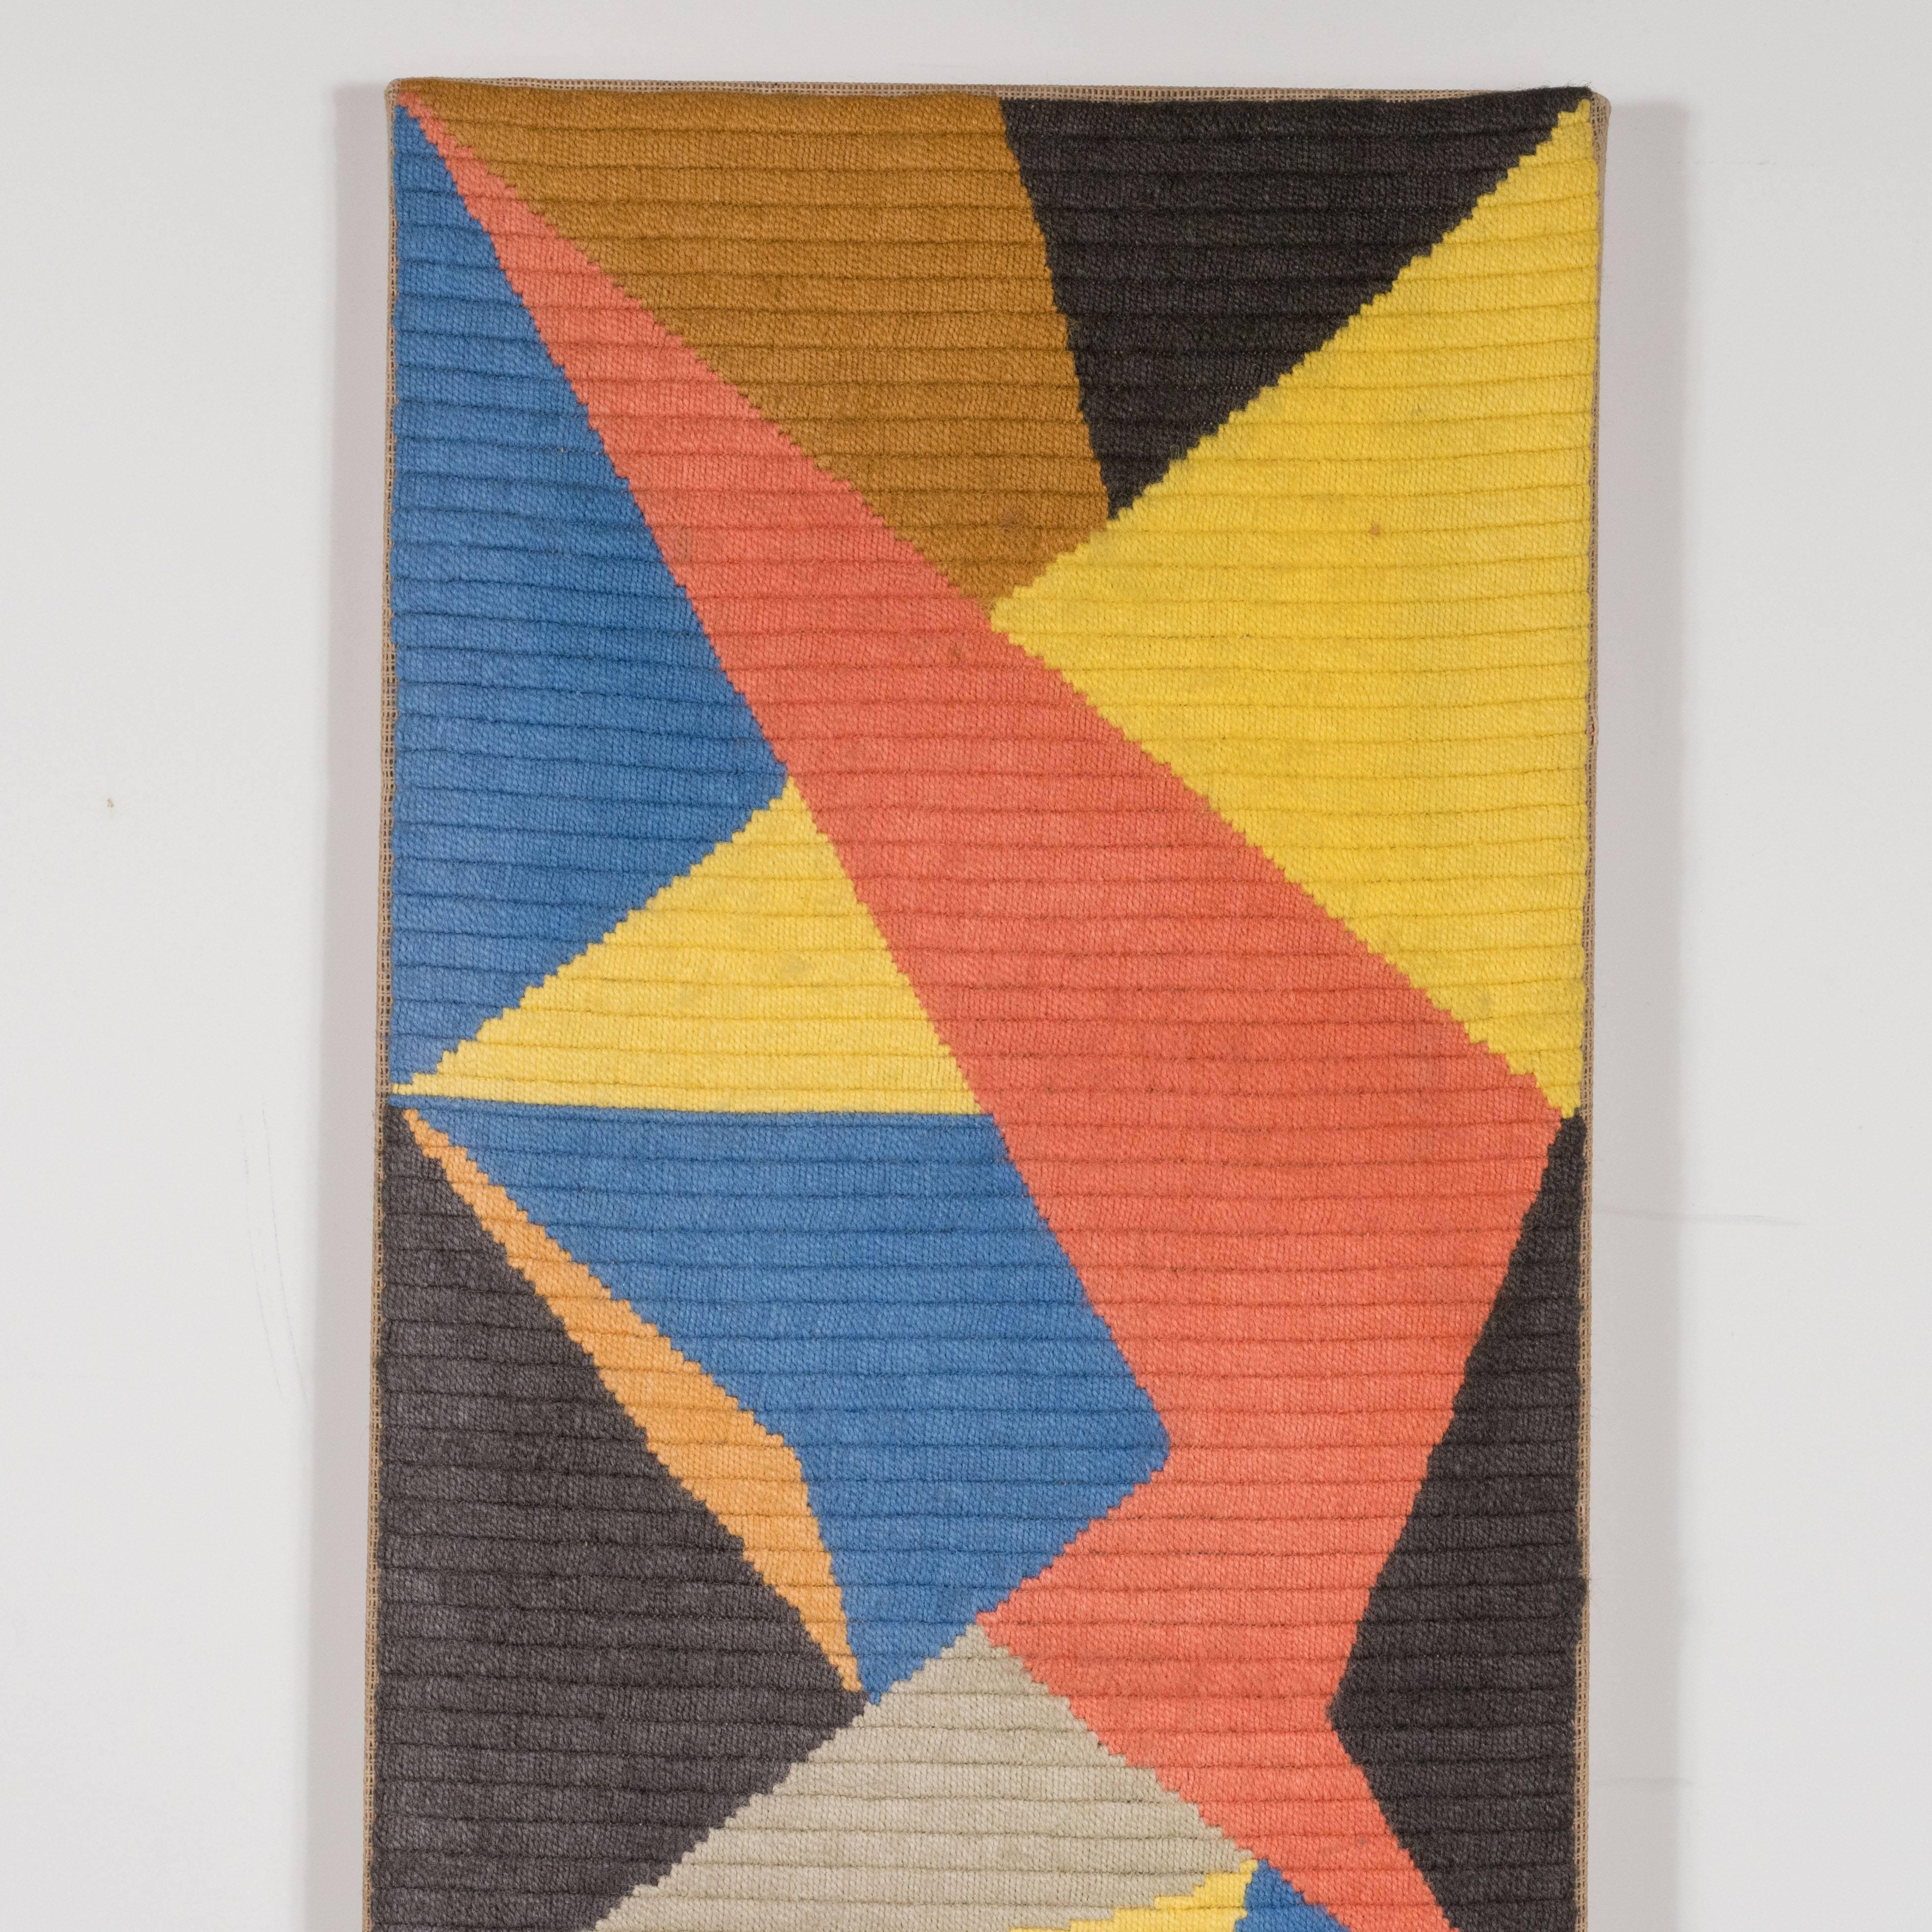 This compelling Mid-Century Modernist tapestry wall hanging was realized in tightly woven, hand-knotted cotton textile. The composition features an array of intersecting planes in a vibrant palate that includes hues of persimmon, hazelnut, lemon